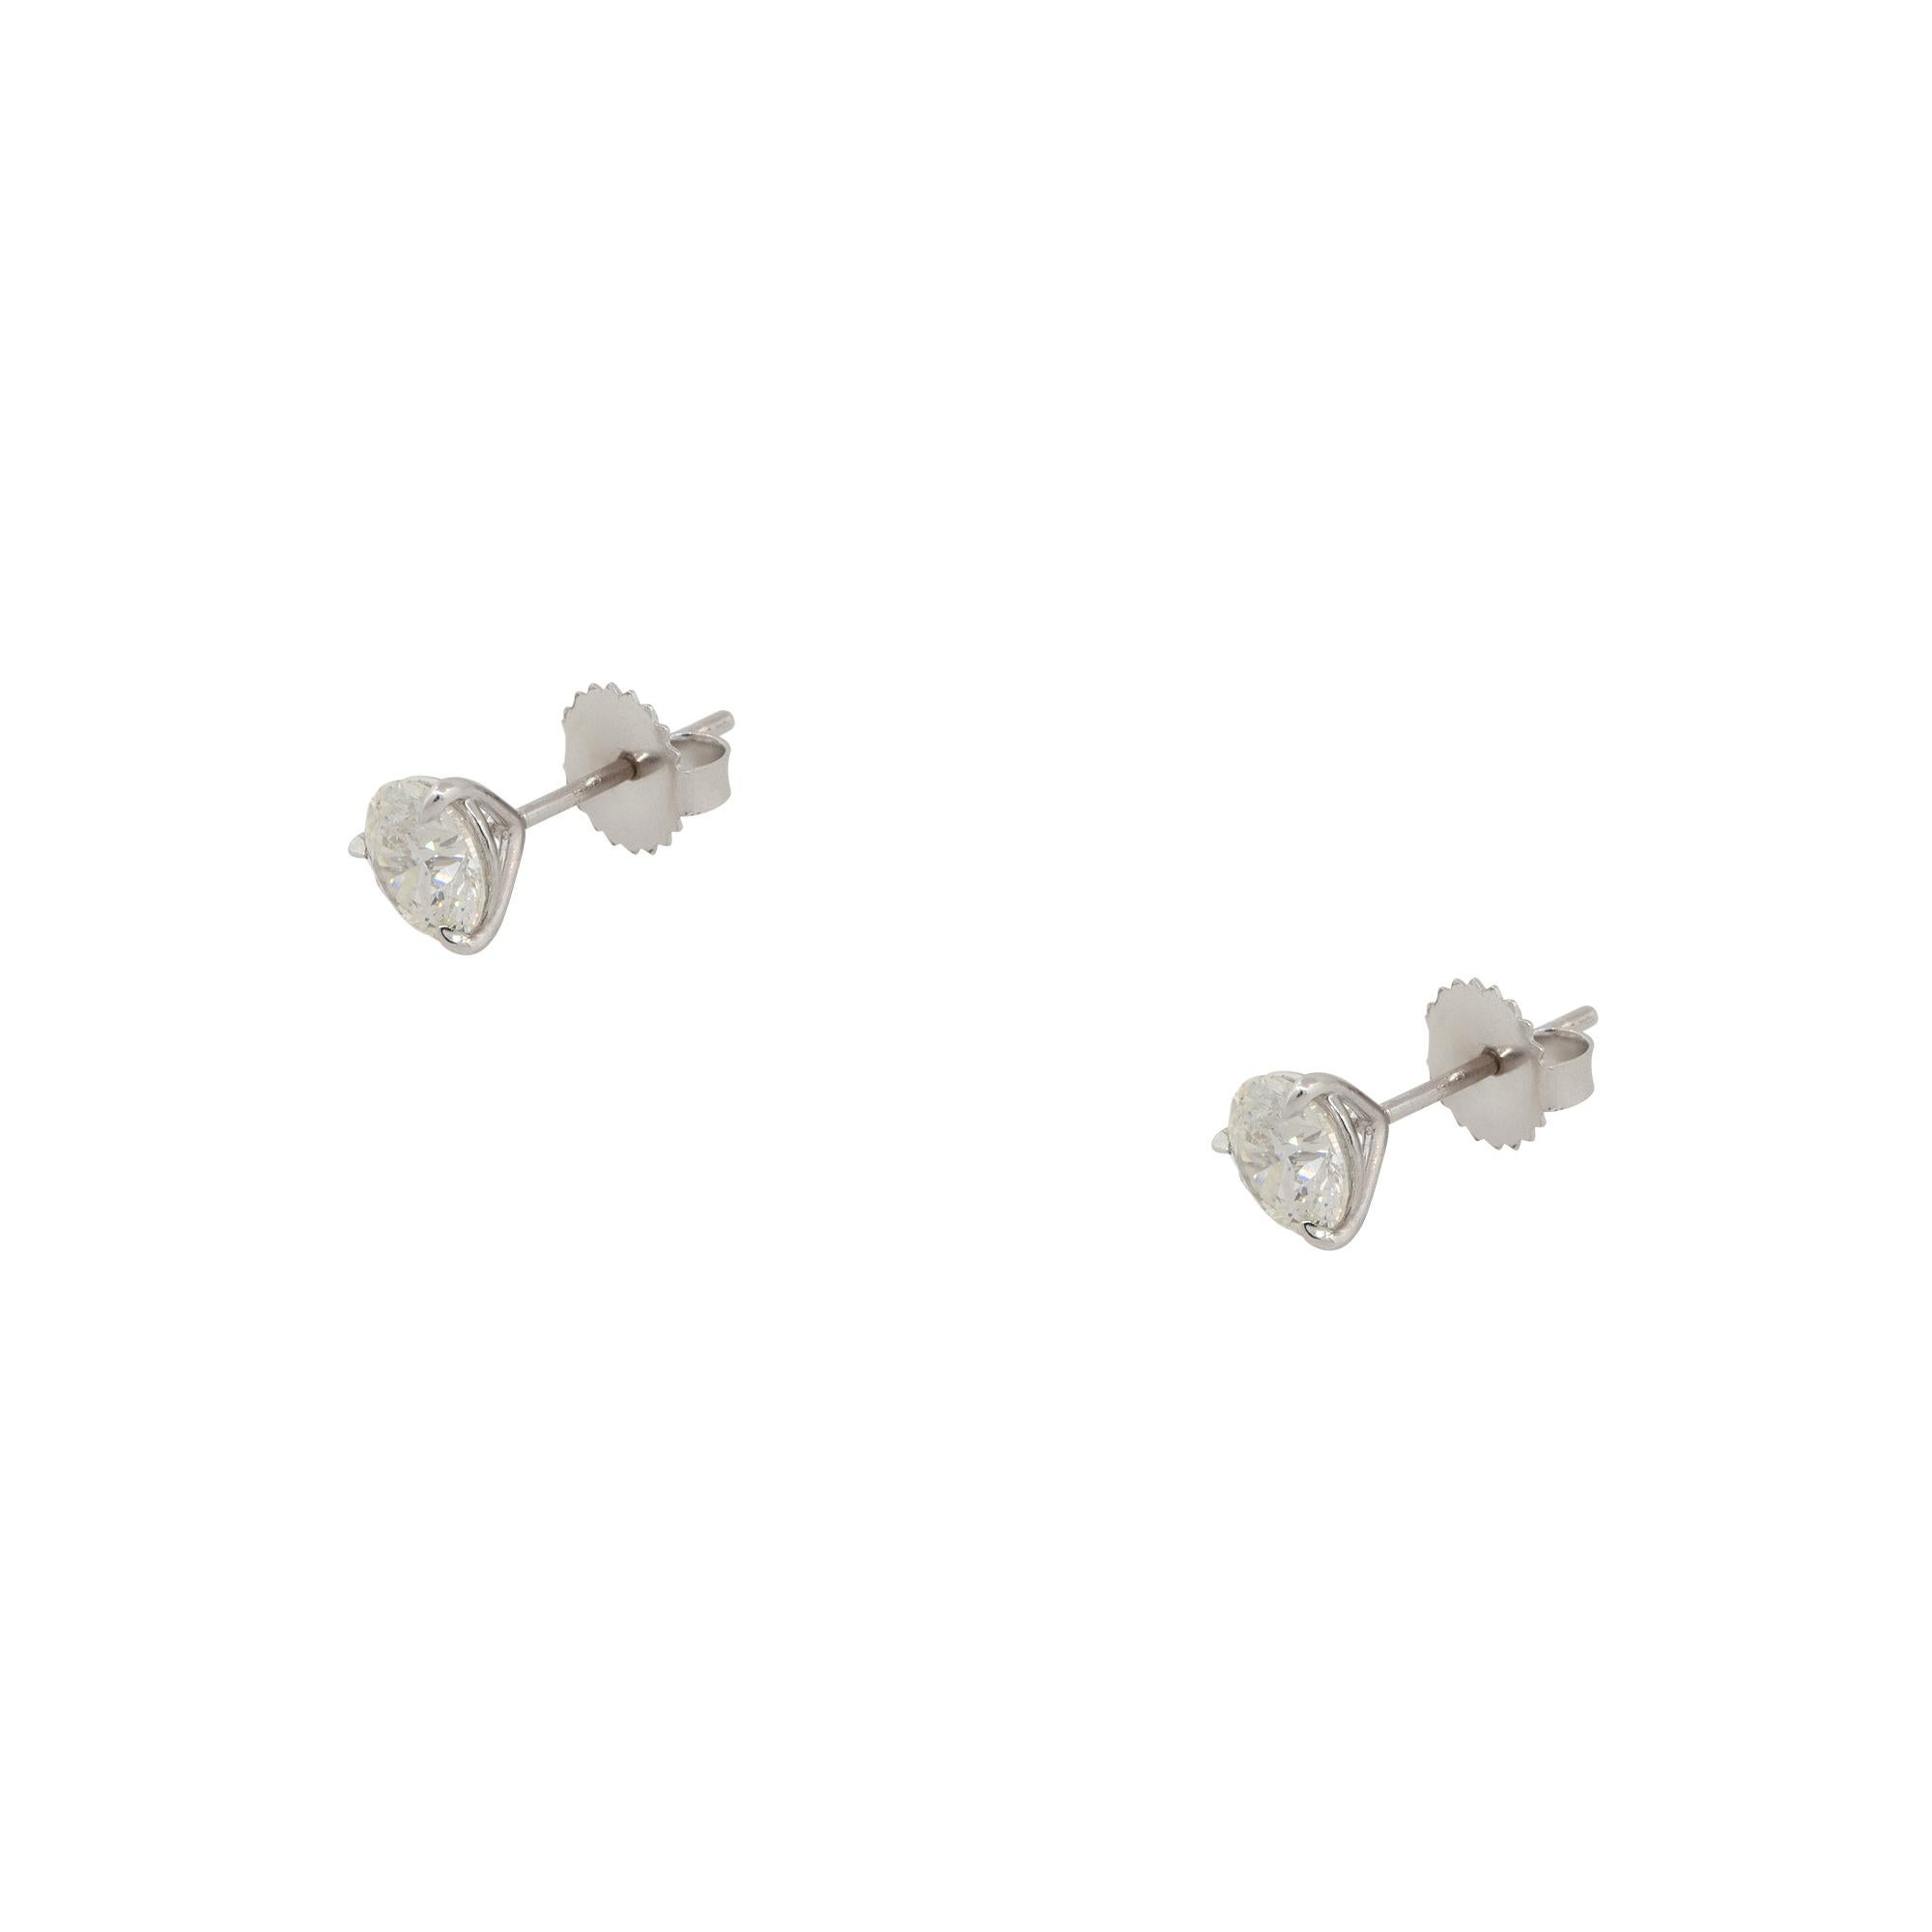 Material: 14k White Gold
Diamond Details: Approx. 2.03ctw. of Diamonds. Diamonds are G/H in color and SI2 in clarity
Earring Backs: Friction Backs
Additional Details: This item comes with a presentation box!
SKU: A30315208